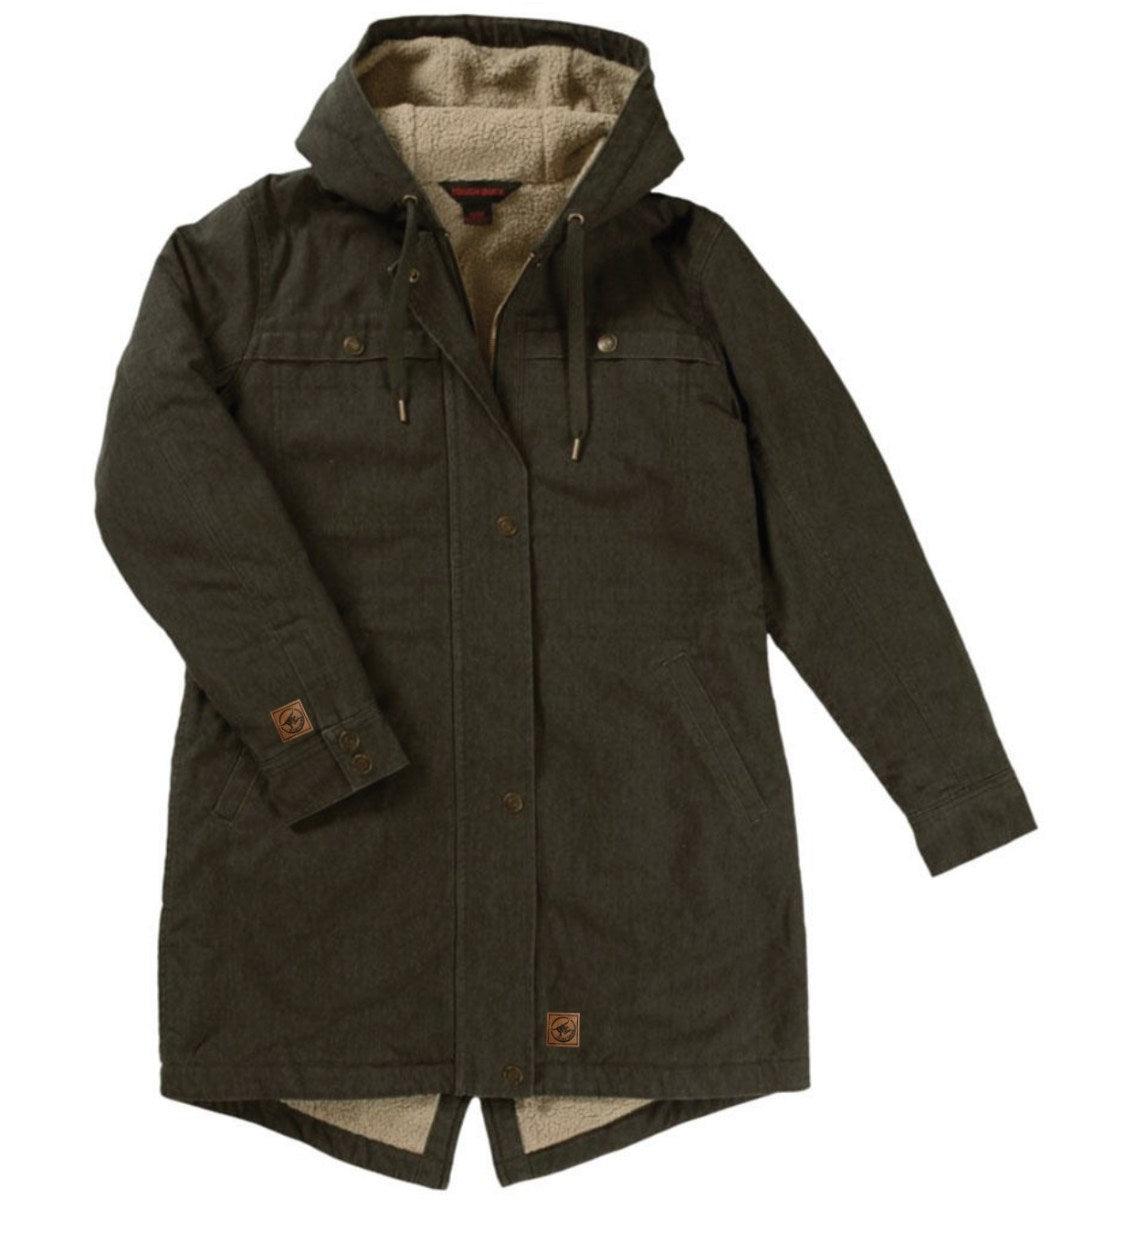 Ladies Ranchy Tough Sherpa Lined Jacket - The Ranchy Equestrian